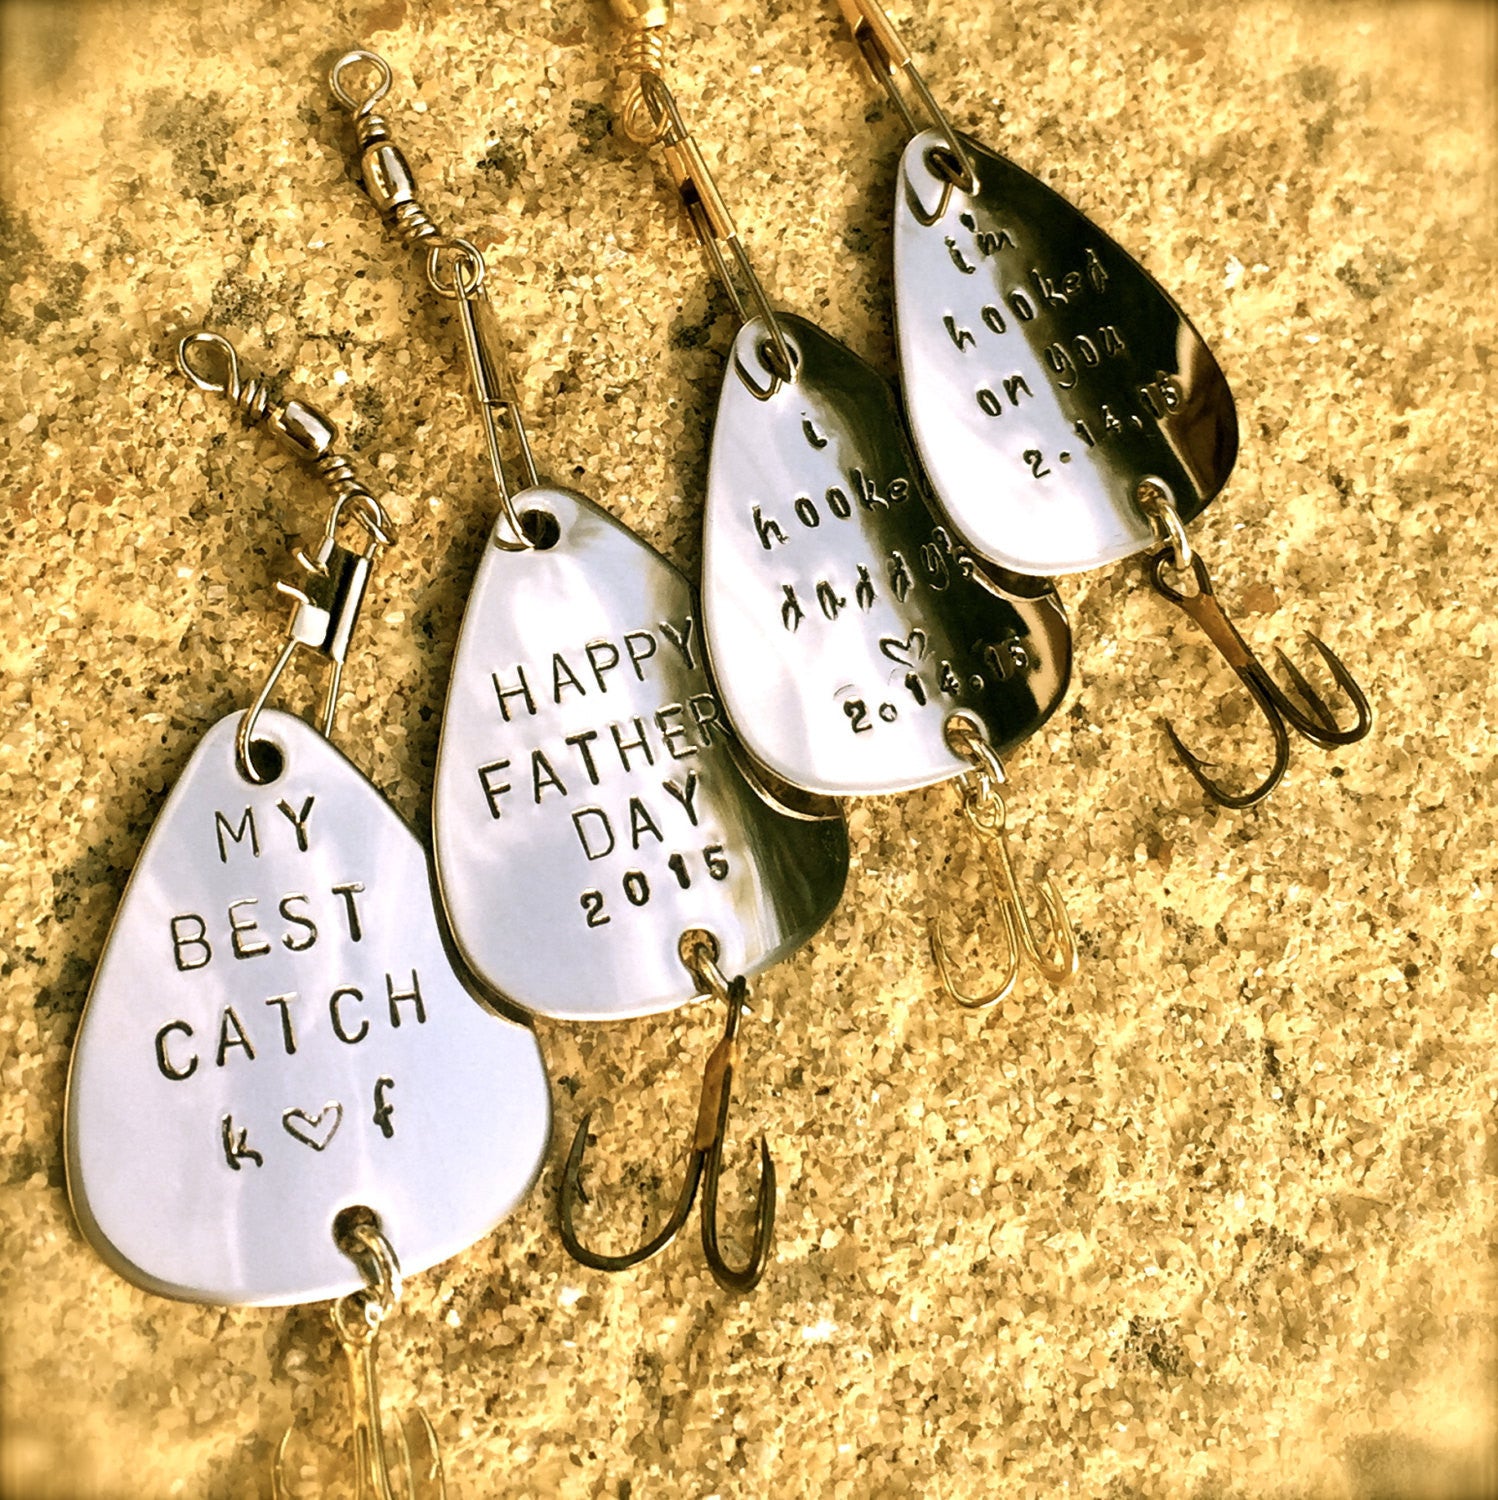 Fishing Lure,  For Him, Boyfriend Gift, Personalized Fishing Lure, Hand Stamped Fishing Lure,natashaaloha, Father's Day Gift - Natashaaloha, jewelry, bracelets, necklace, keychains, fishing lures, gifts for men, charms, personalized, 